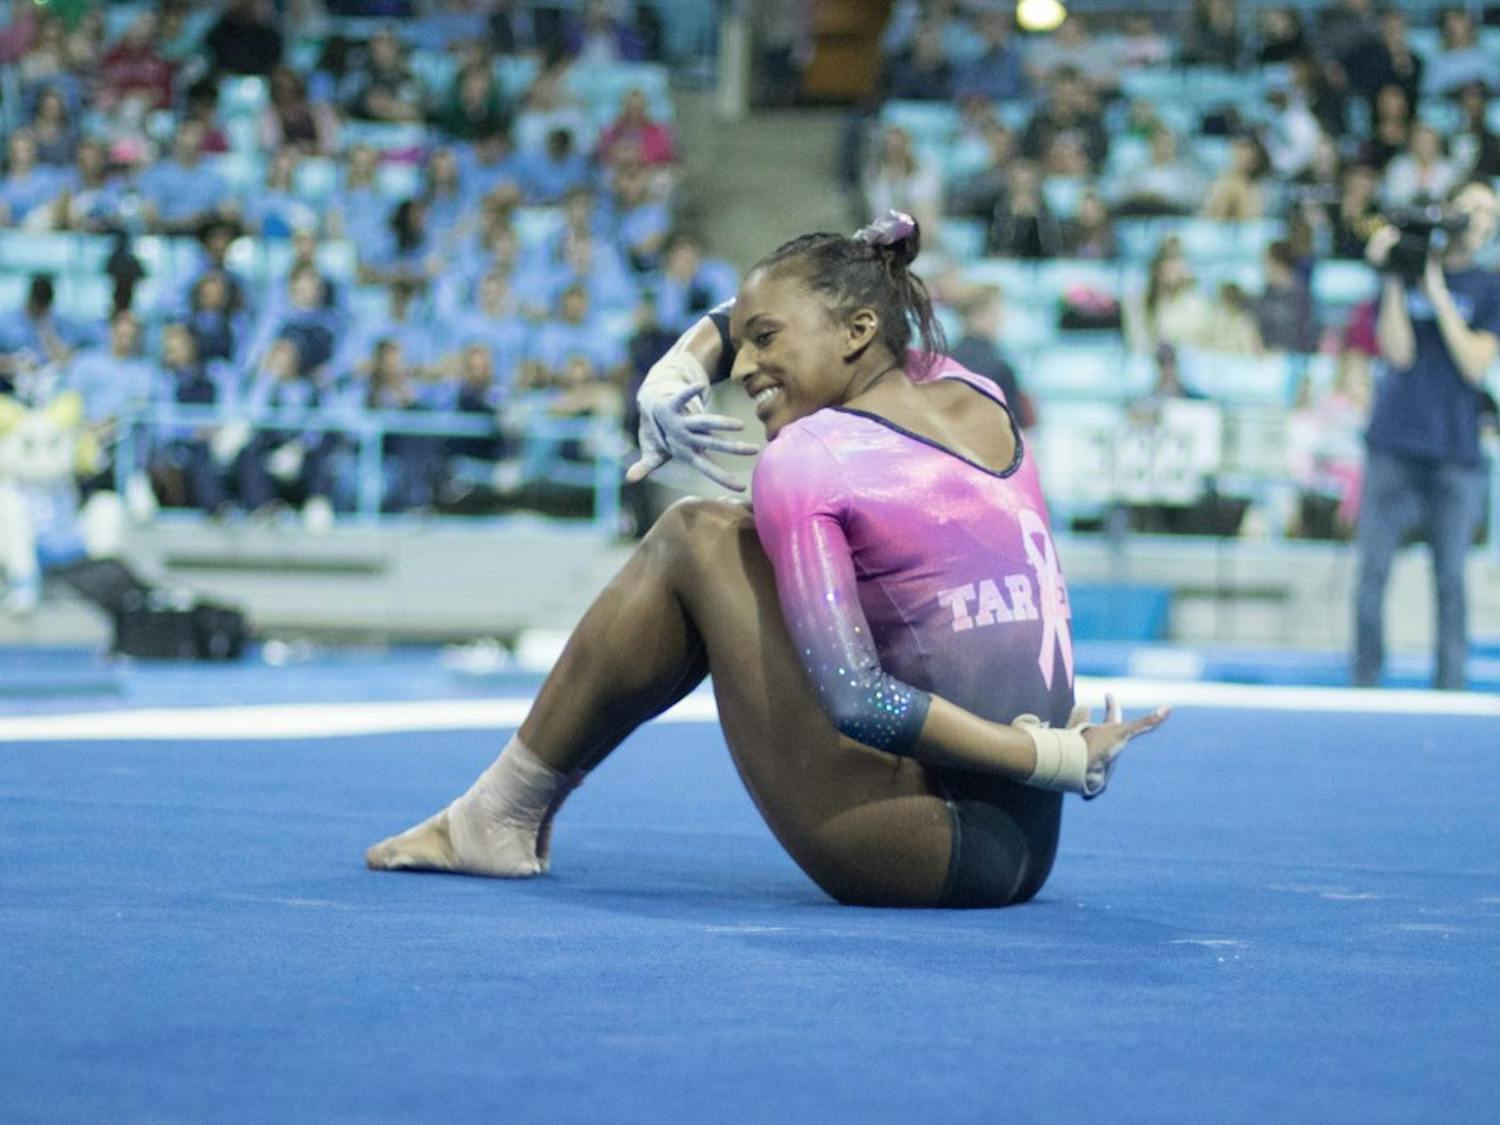 Khazia Hislop amazes in floor routine against tough competition in season opener